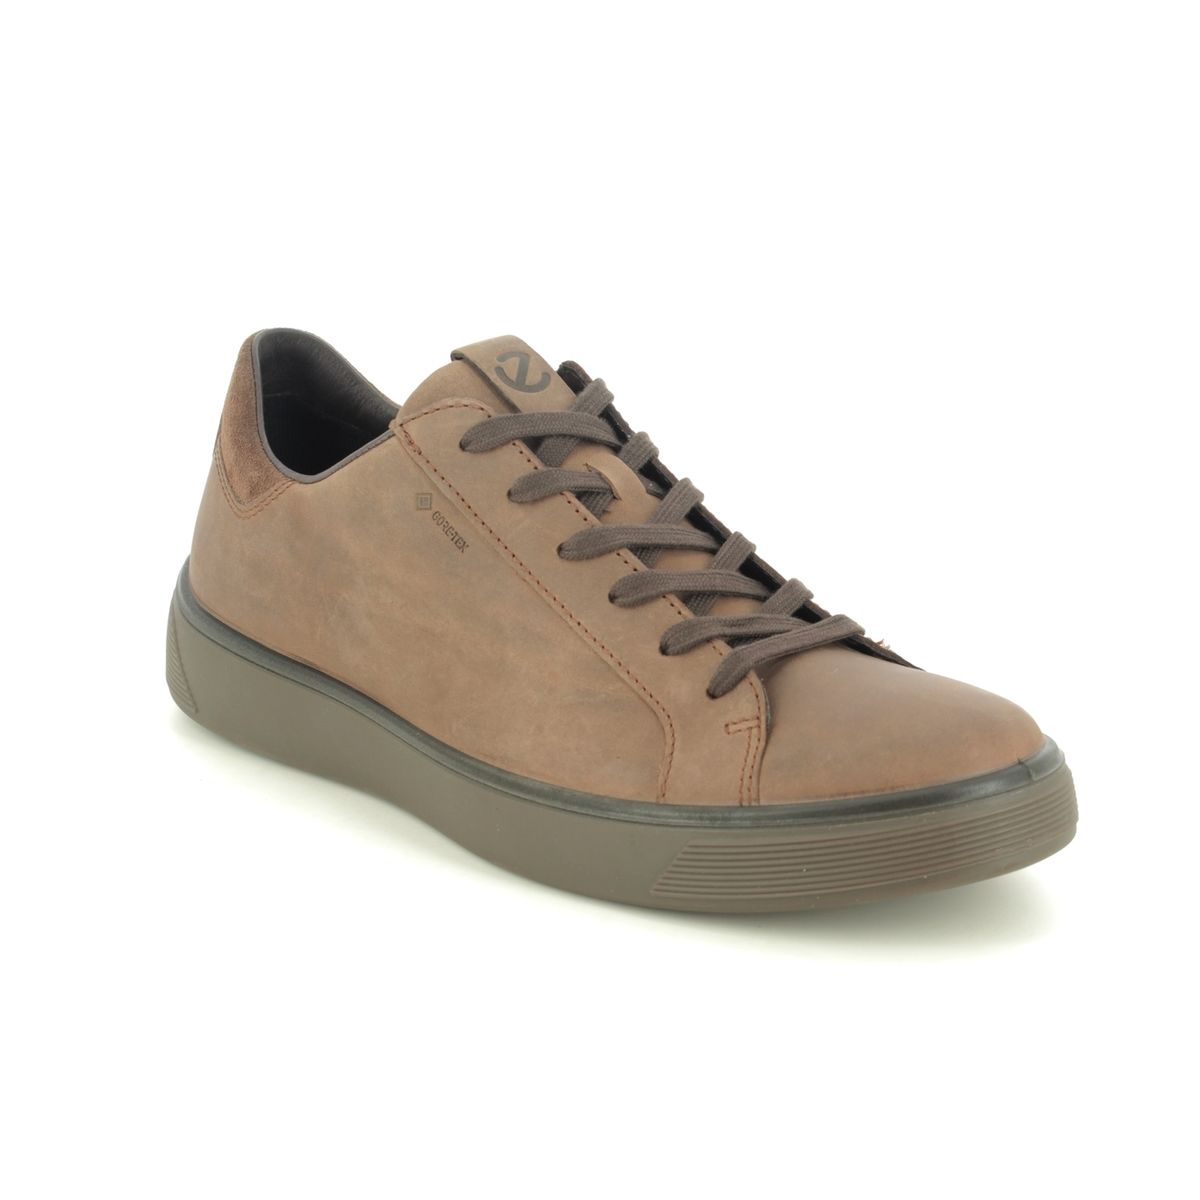 ECCO Street Tray Gtx Brown nubuck Mens comfort shoes 504574-55778 in a Plain Leather in Size 42